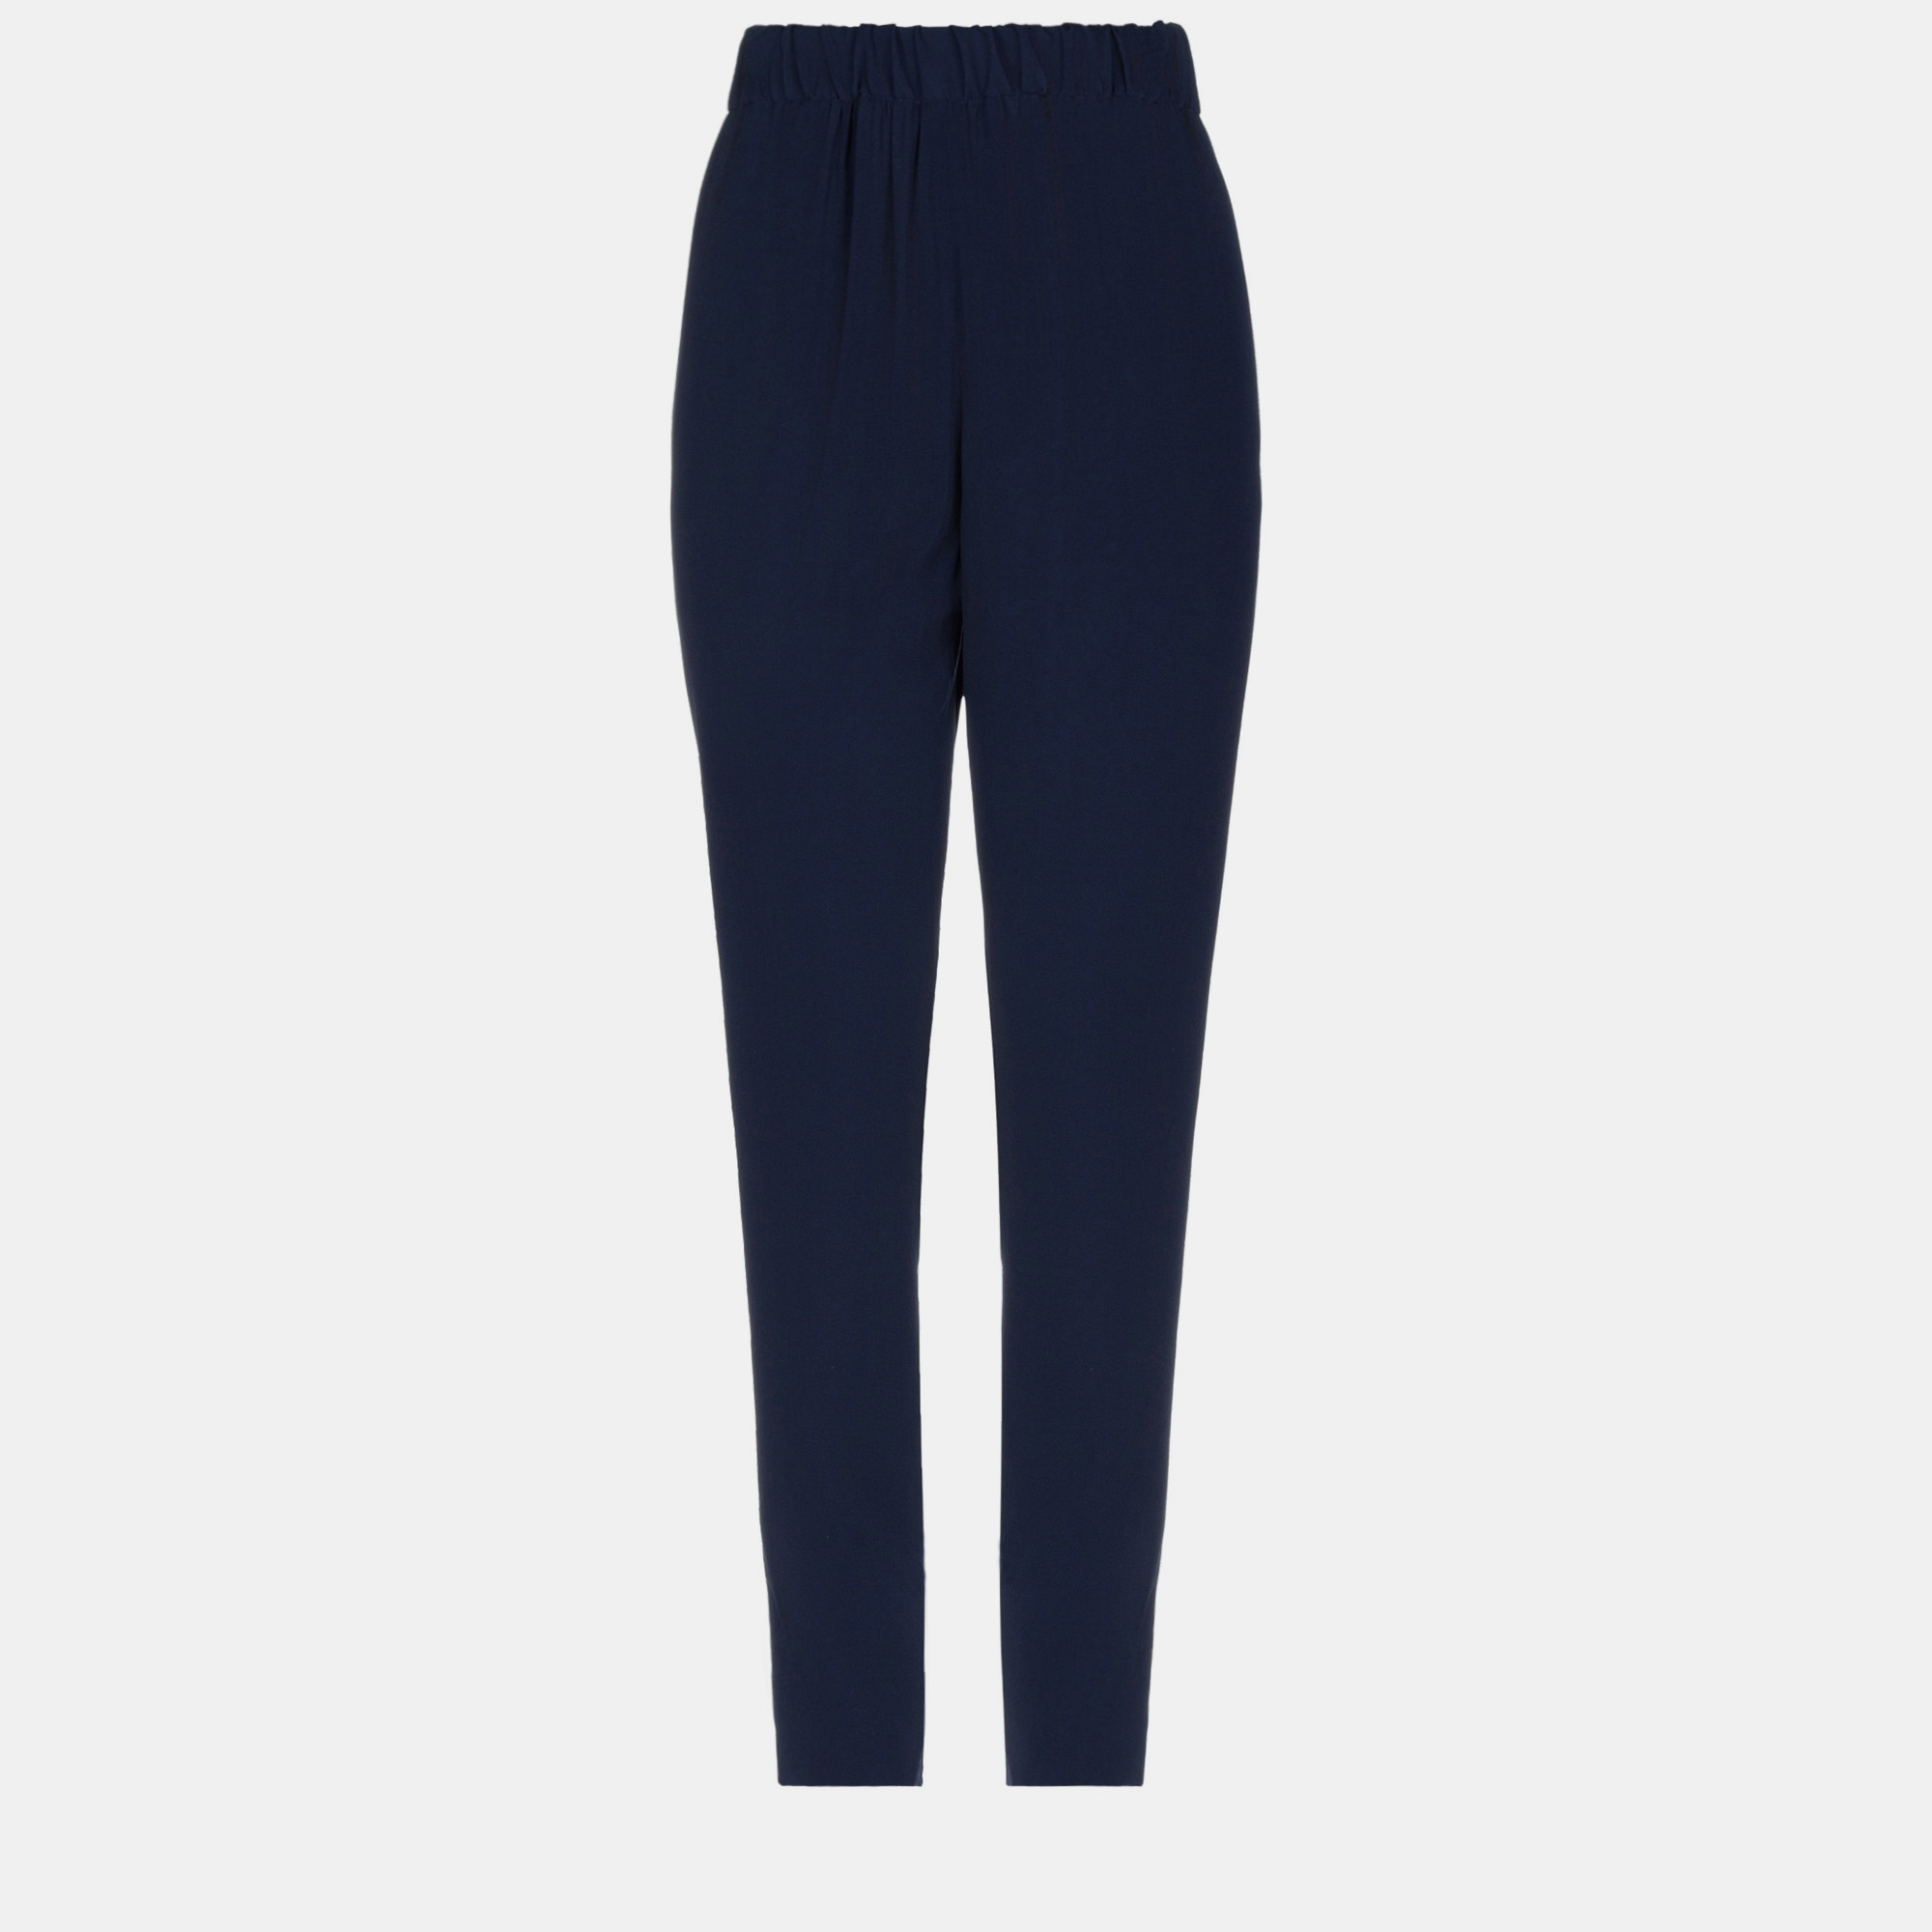 Marni navy blue crepe trousers size 44